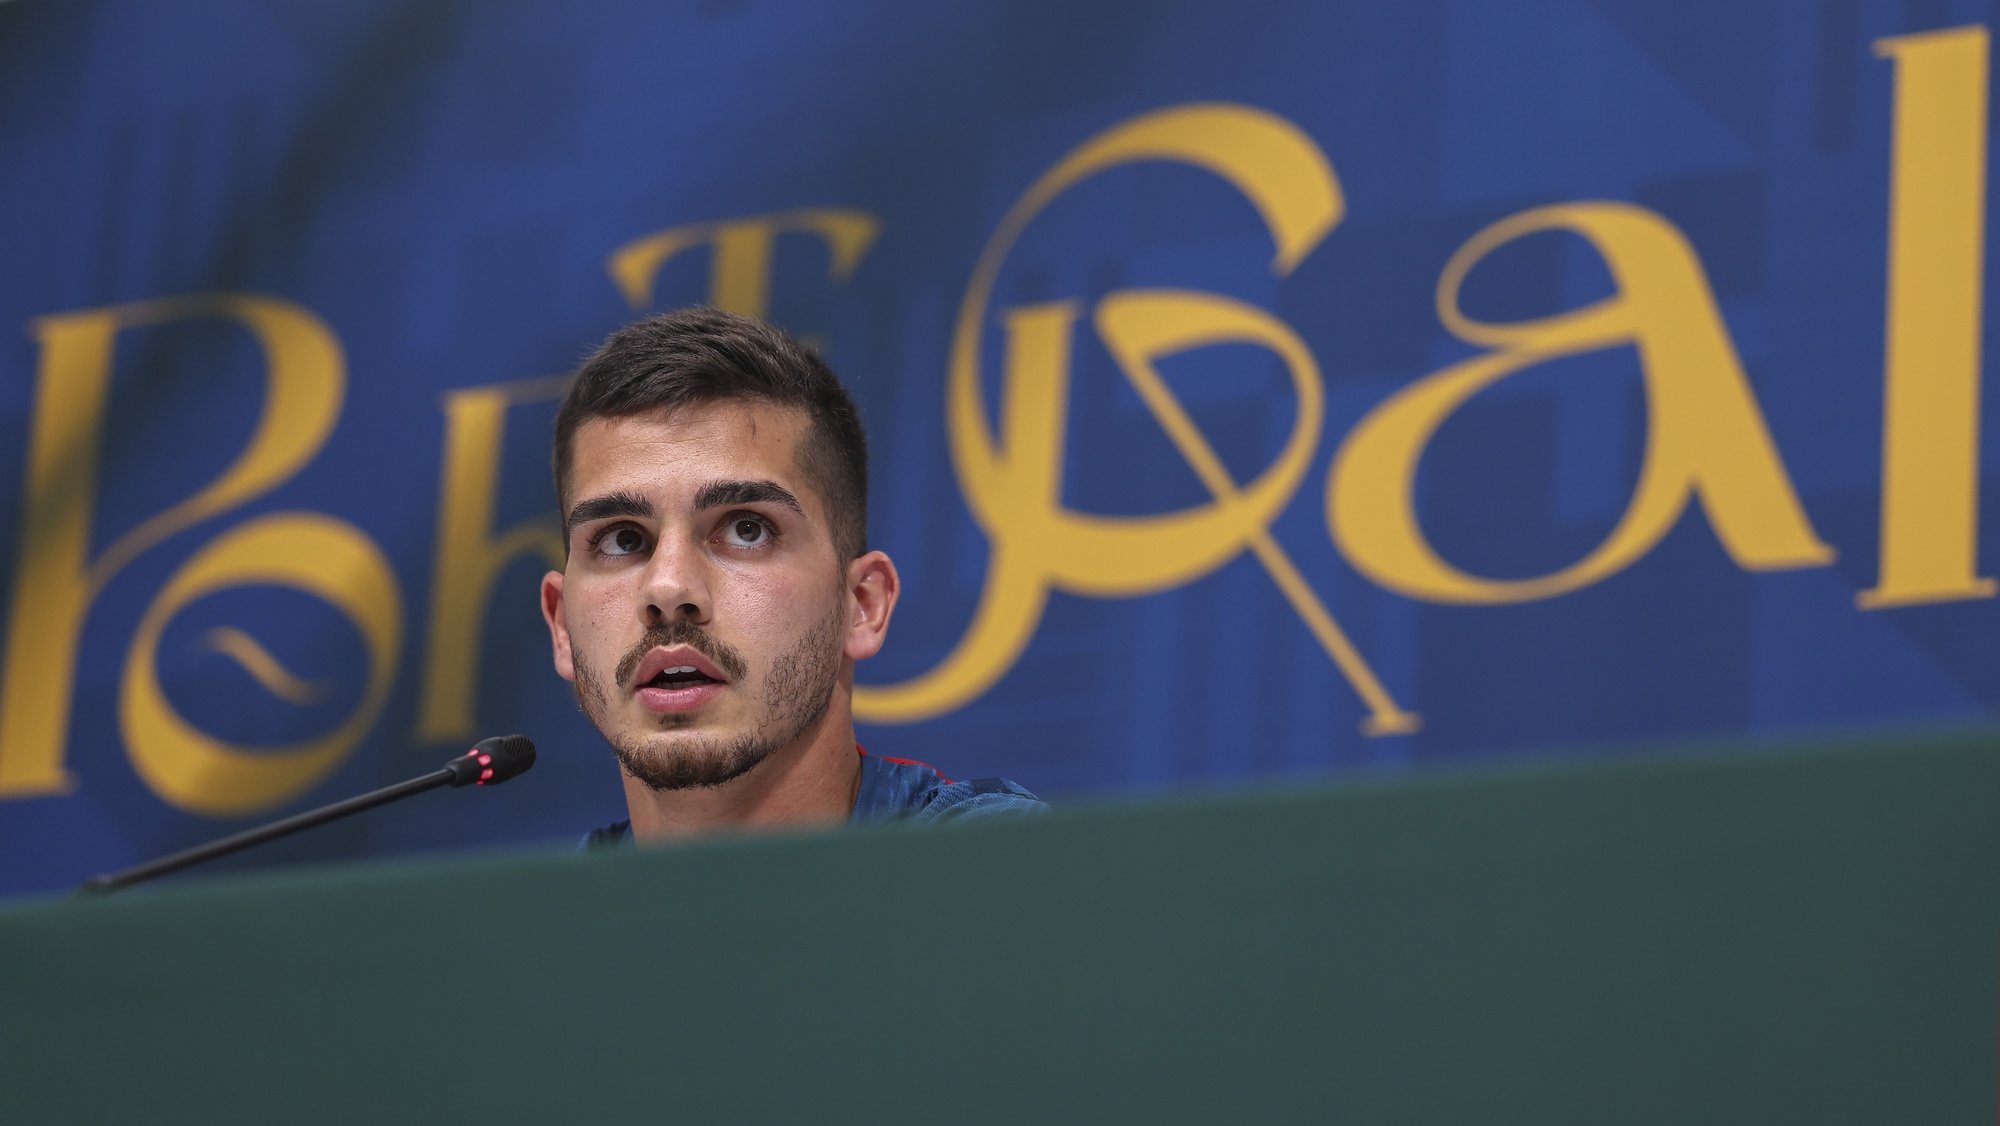 Portugal national team player André Silva attend a press conference ahead of their Fifa World Cup 2022 group H match on 2 December against Korea Republic, at the Qatar National Convention Center (QNCC) in Doha, Qatar, 30 November 2022. JOSE SENA GOULAO/LUSA